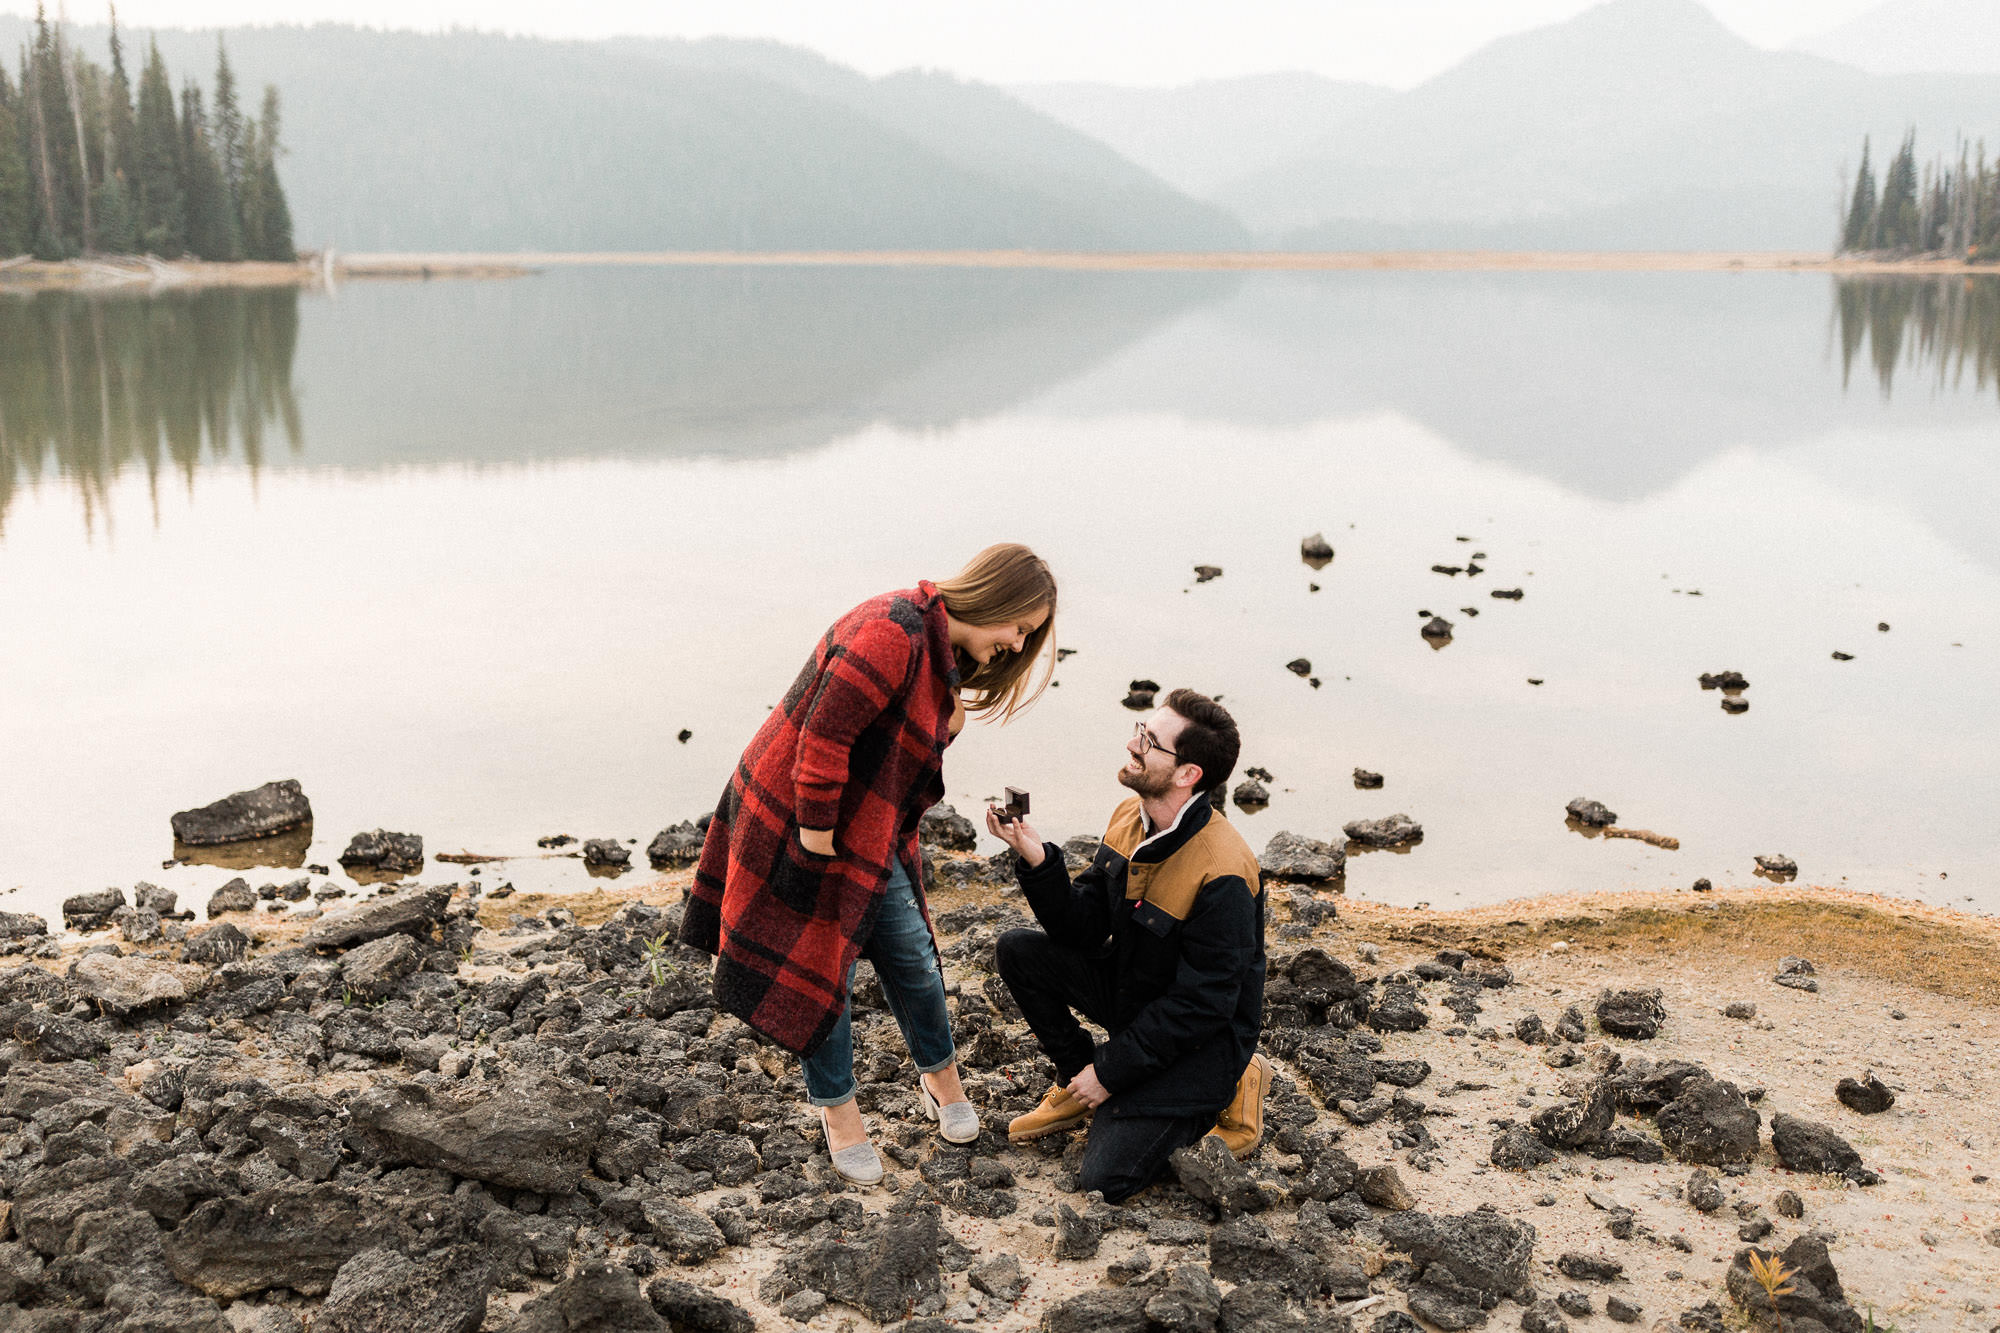 A man proposes to a woman on the shores of Sparks Lake, Oregon